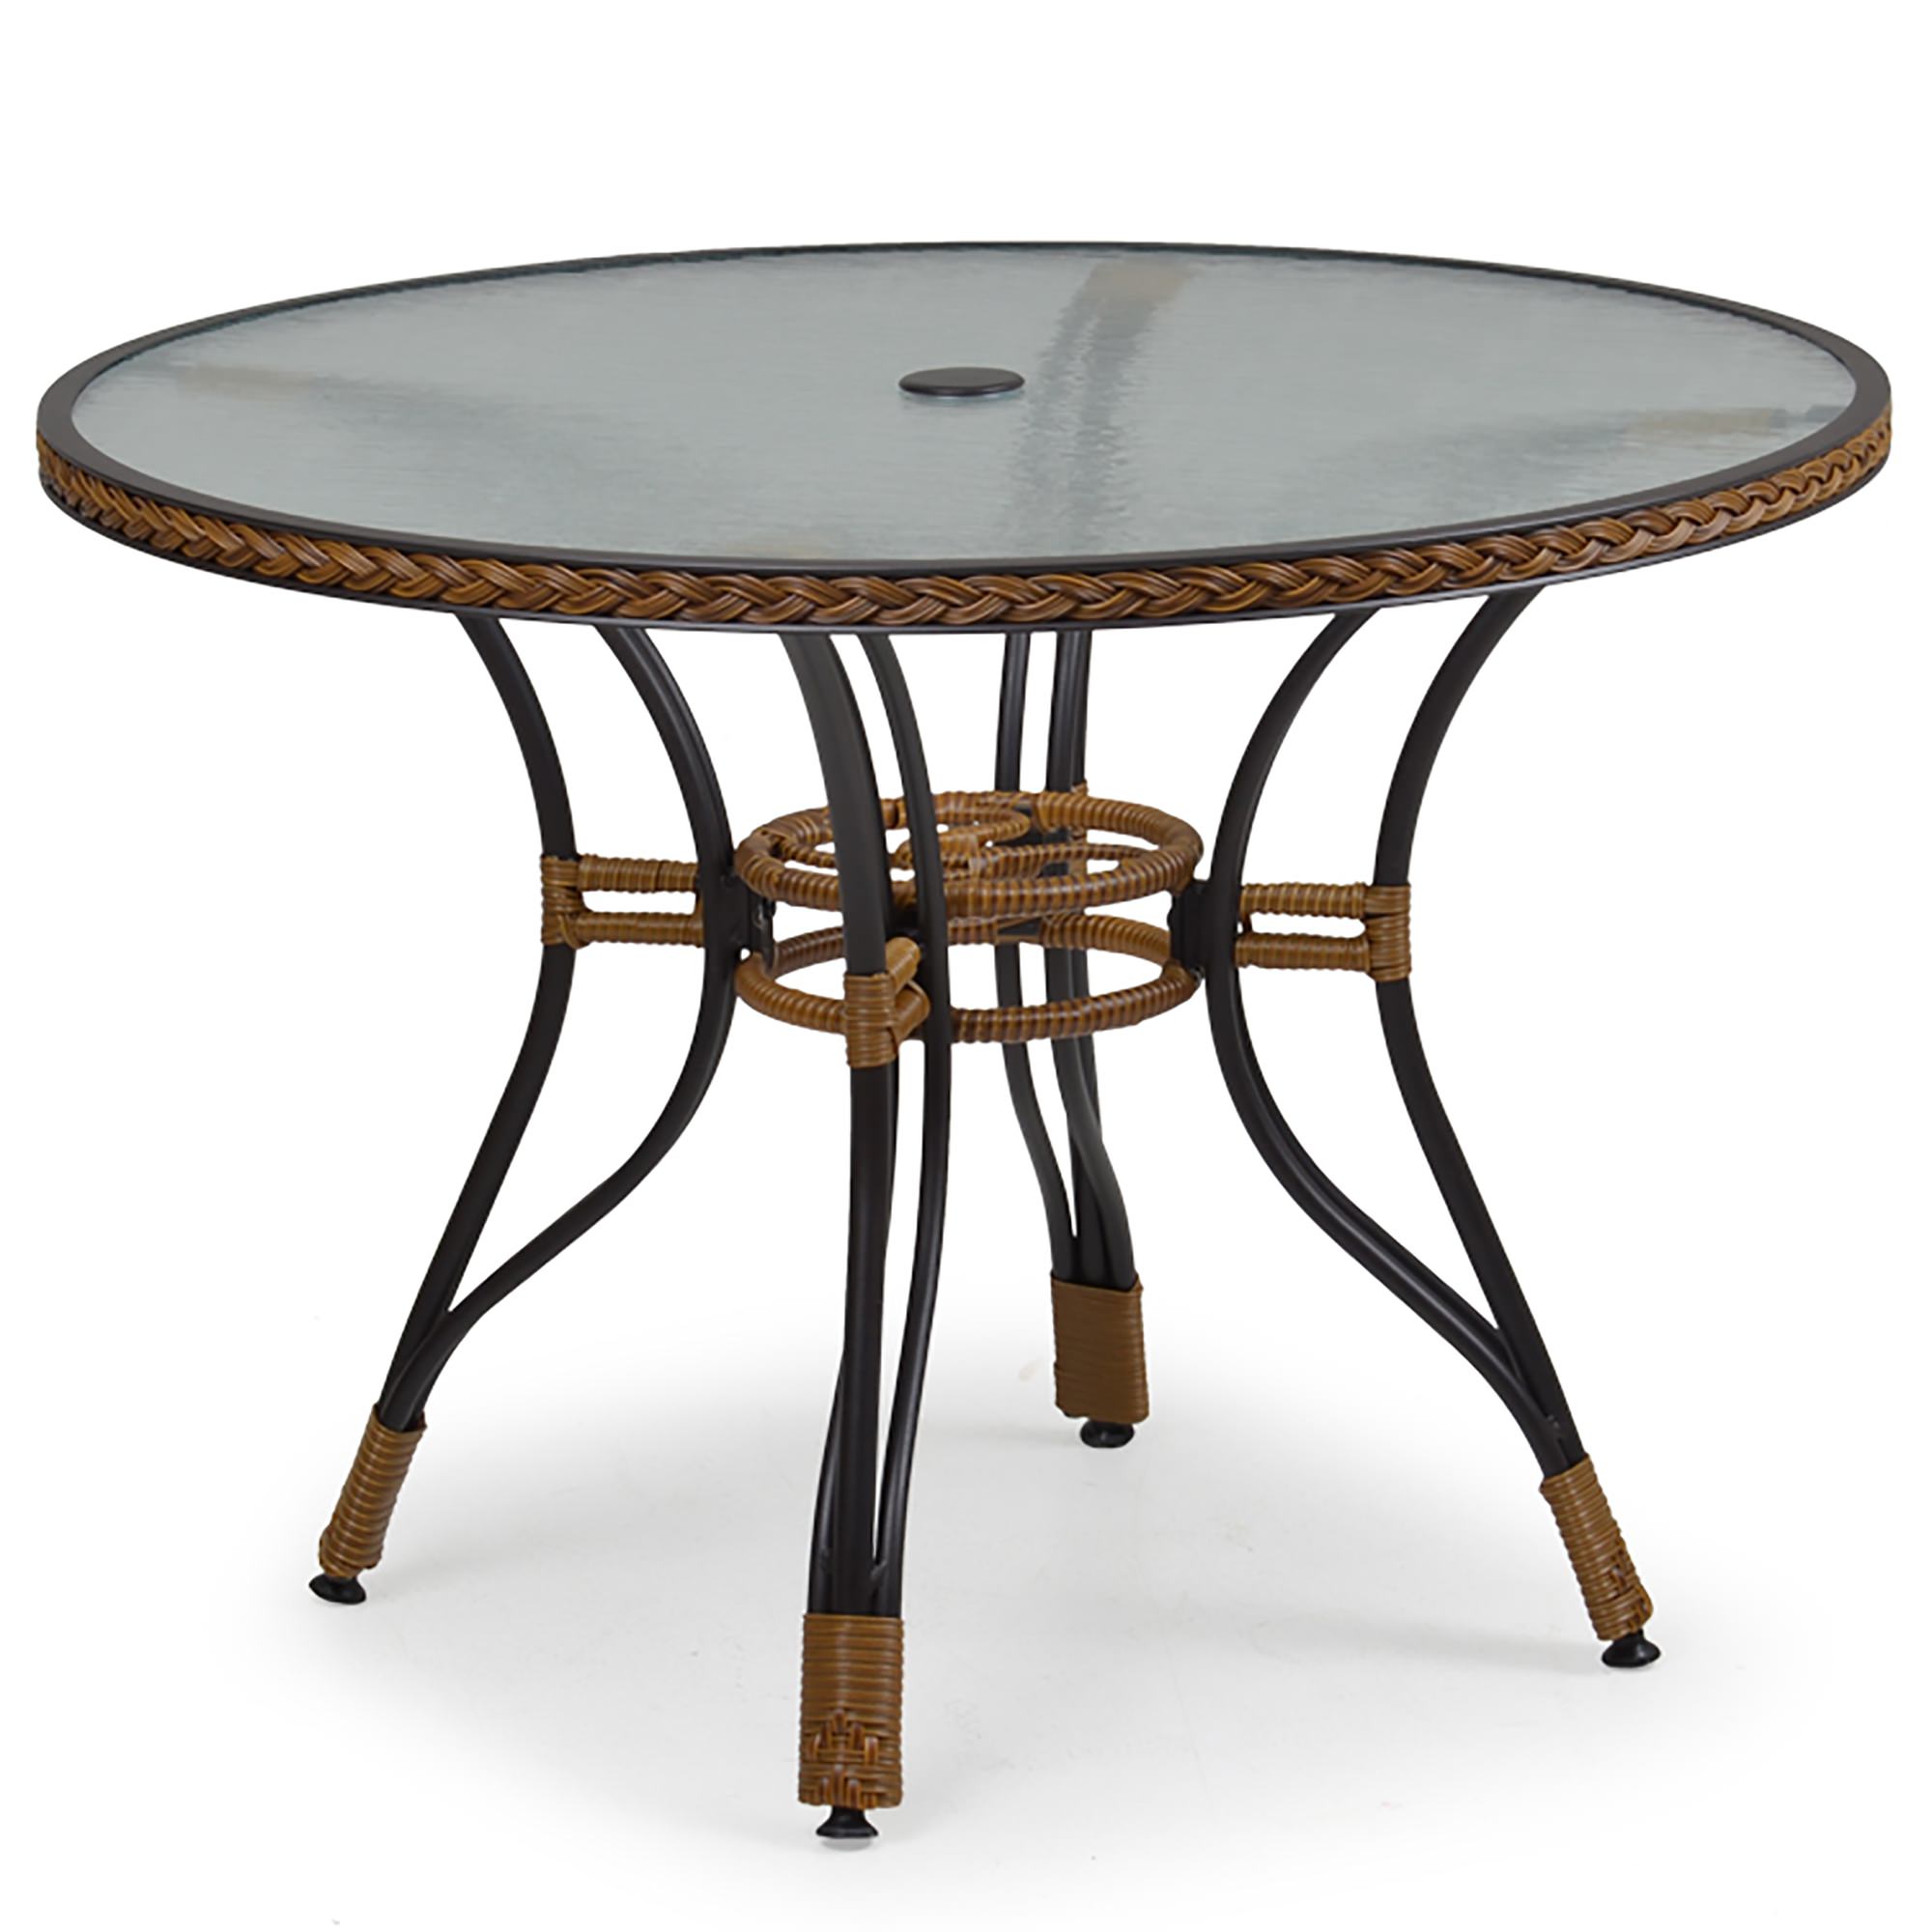 WaterMark Living 40 in Resin Wicker Dining Table with Glass Top